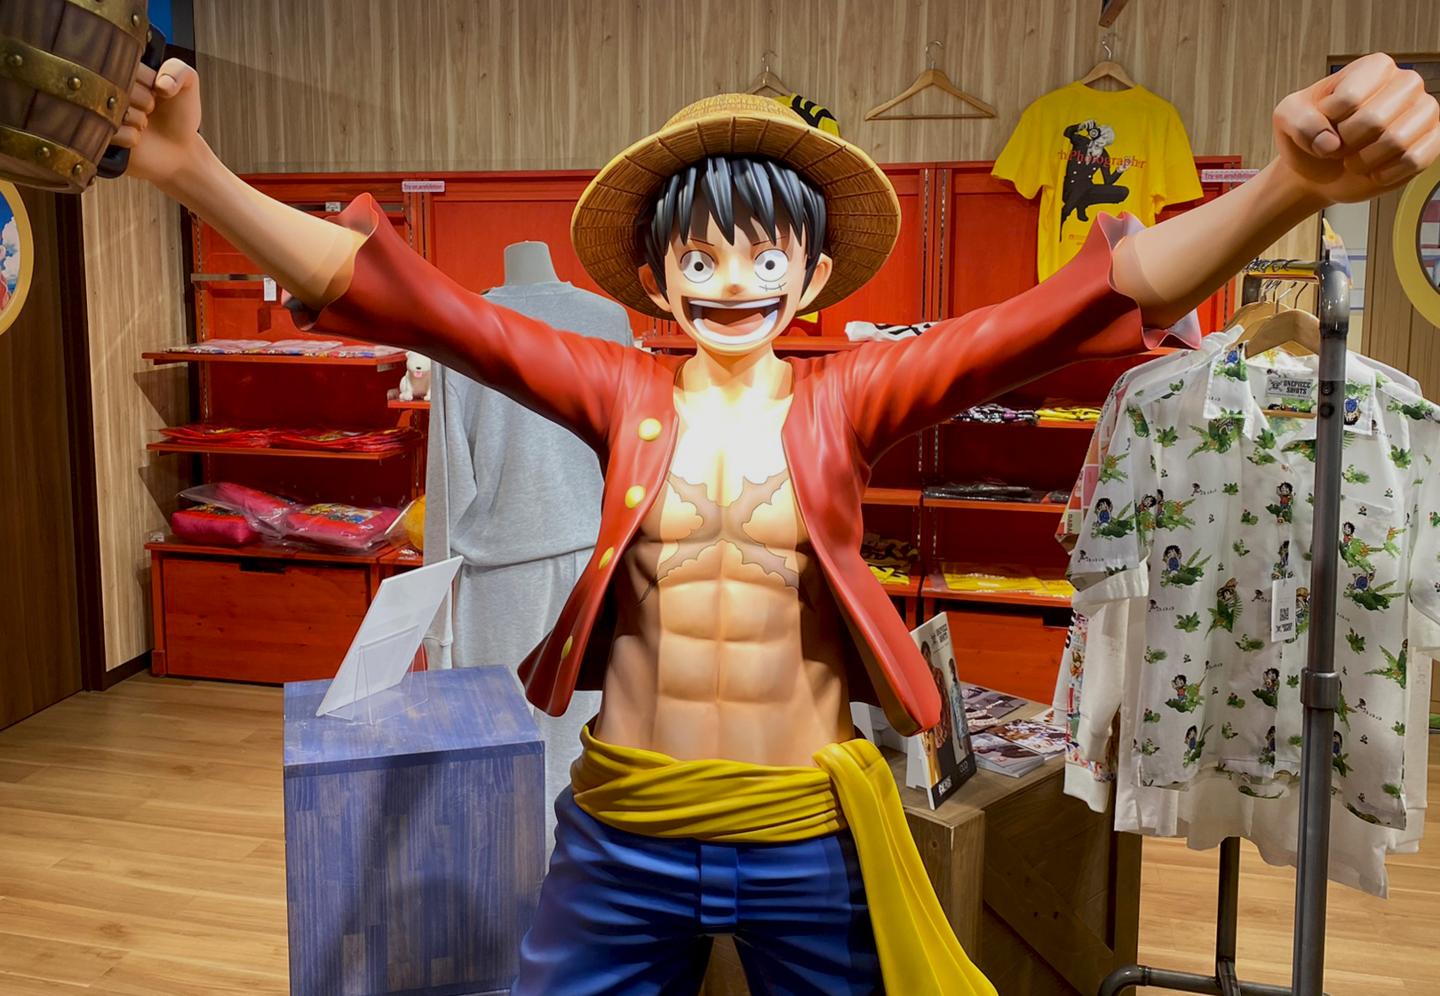 Images of stores in Tokyo that sell official One Piece merchandise